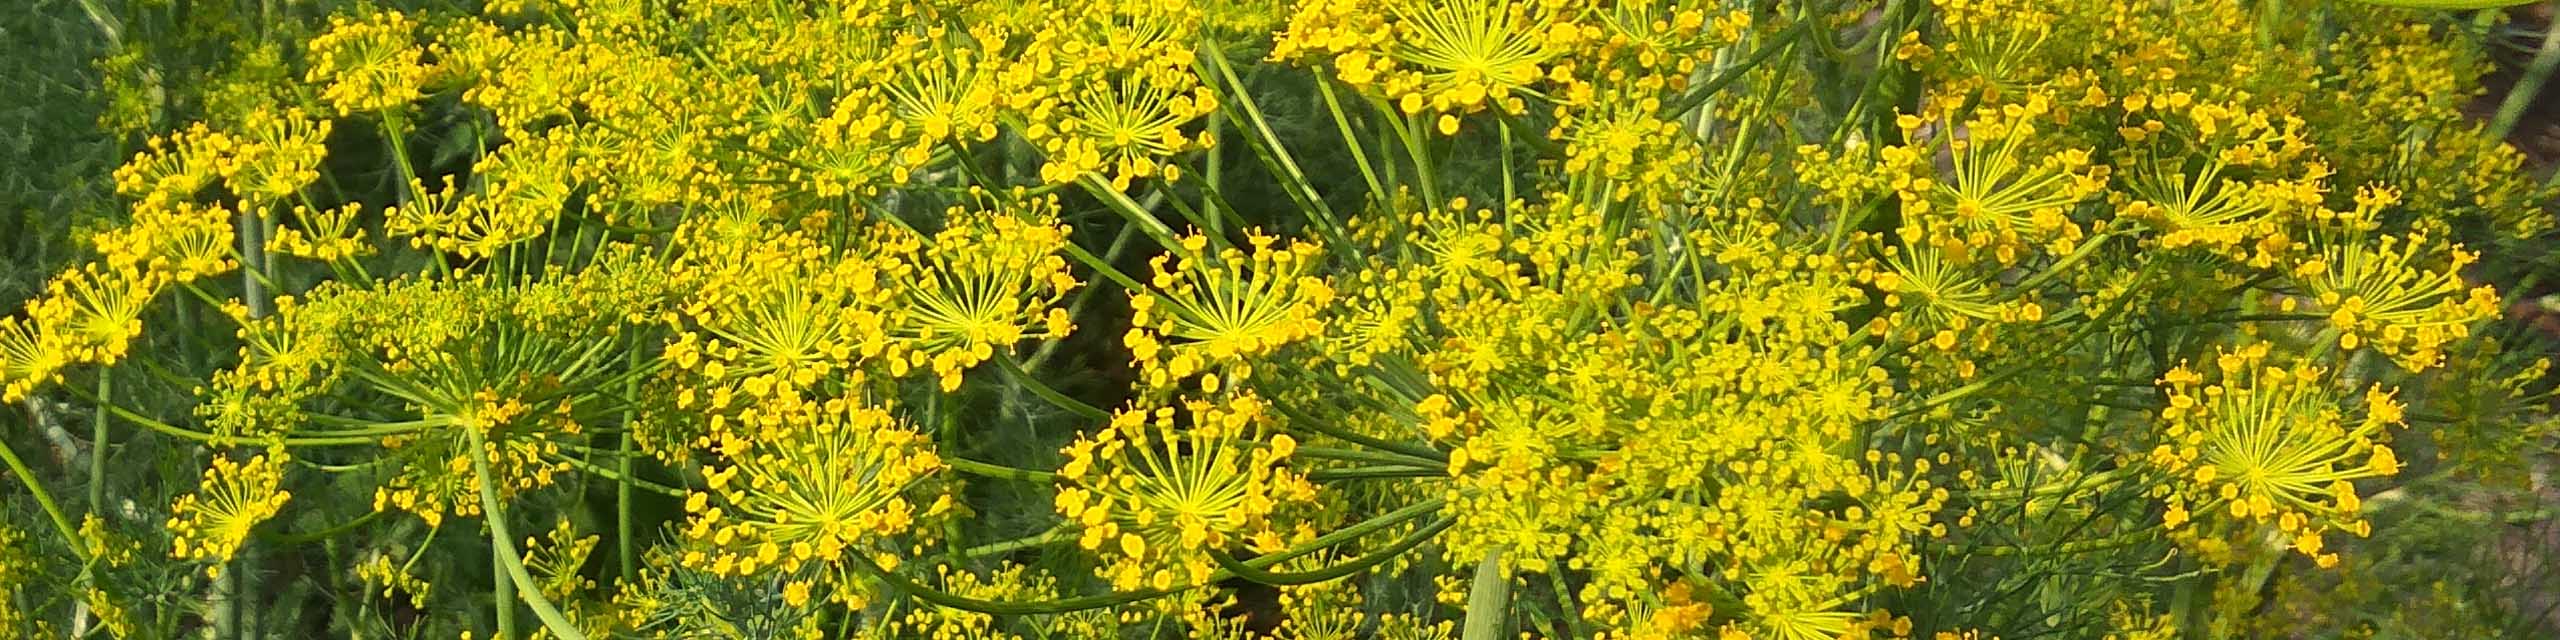 Dill plants with yellow flowers.